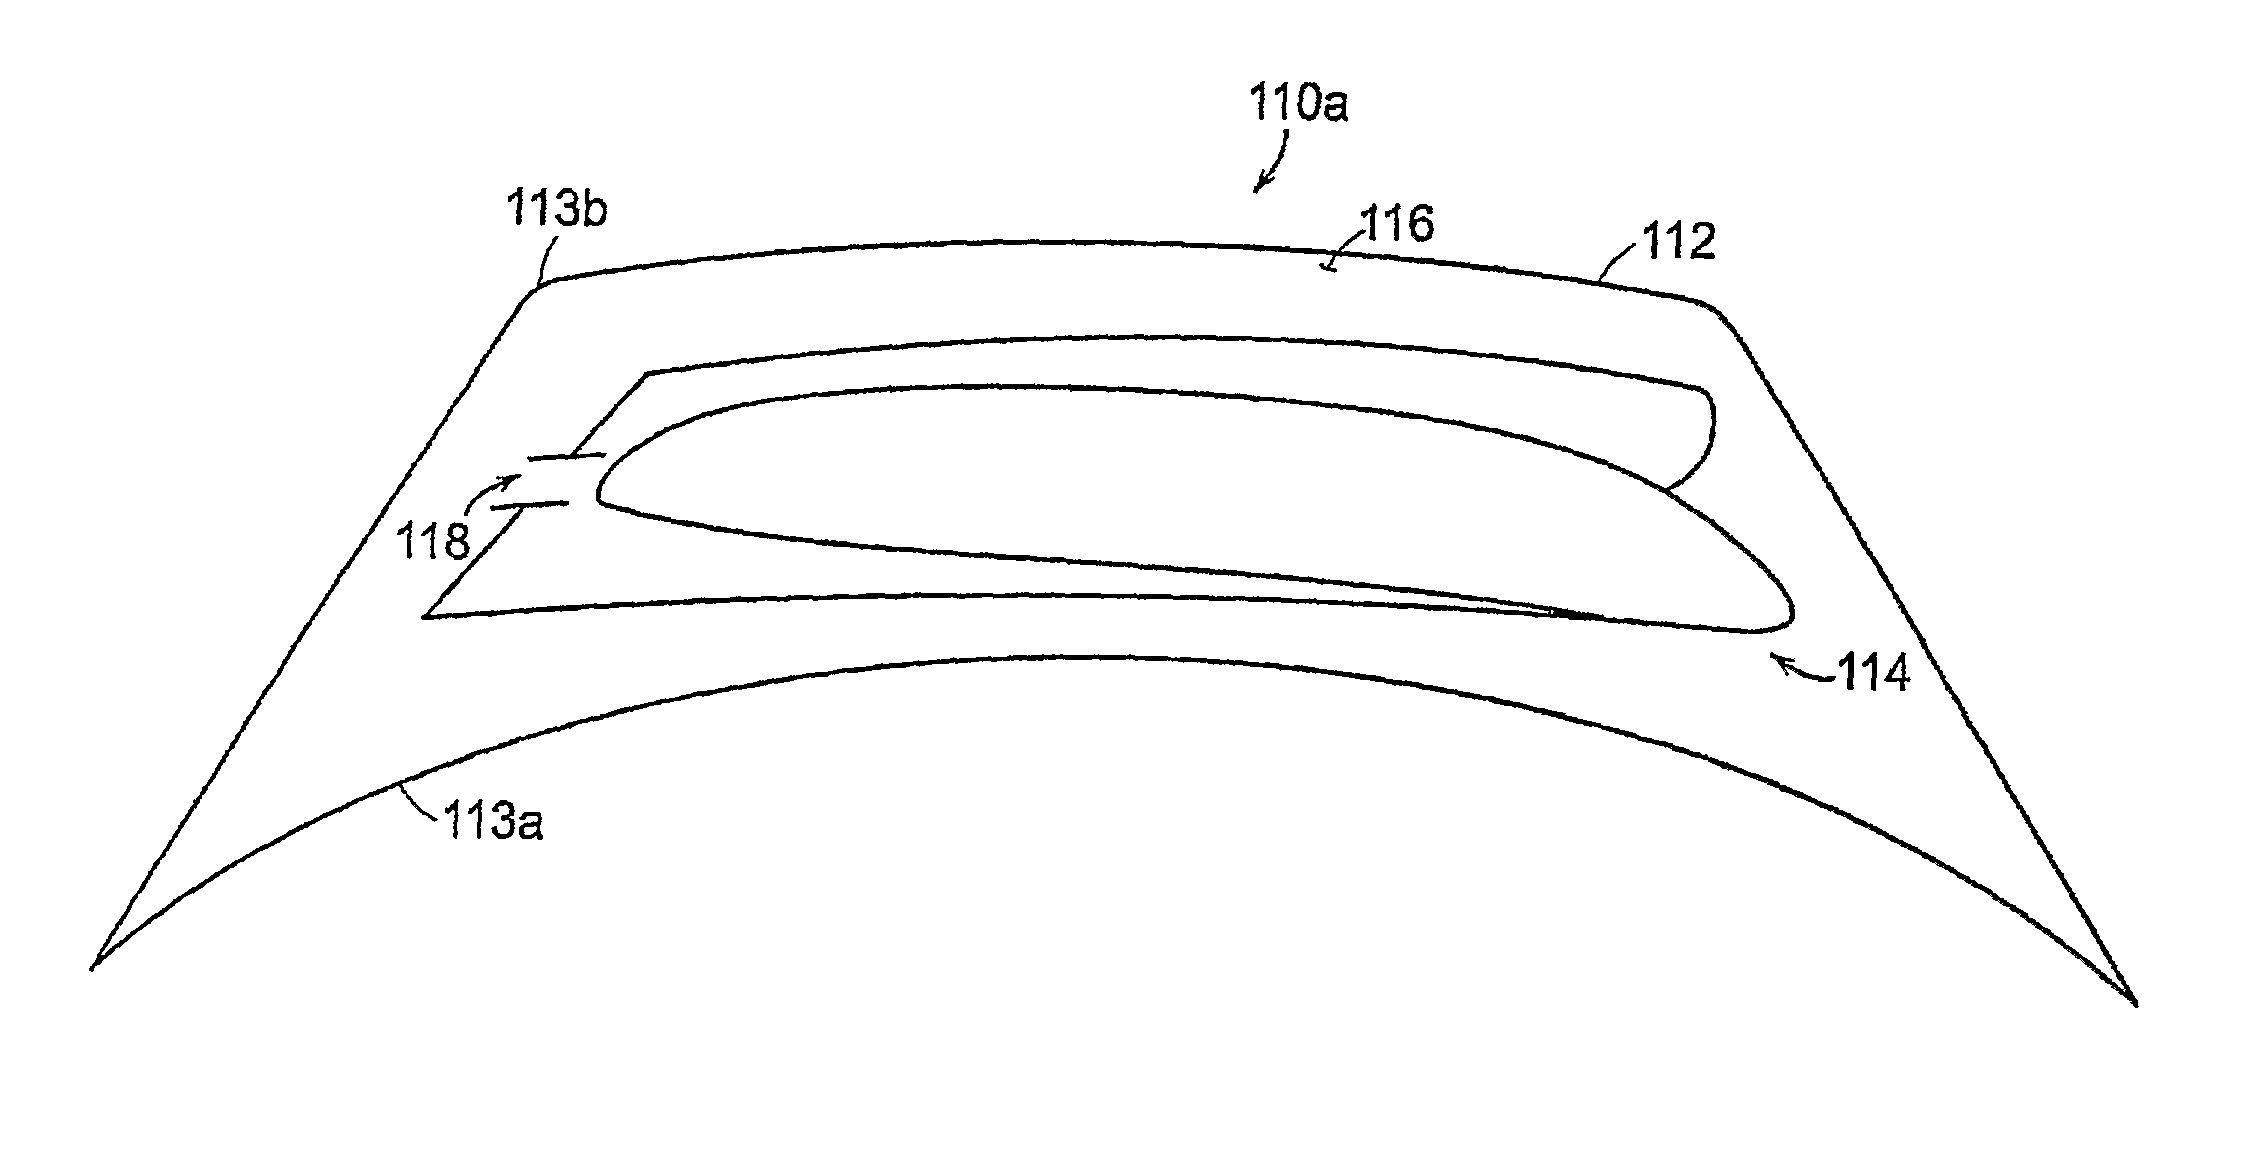 Wireless scleral search coil including systems for measuring eye movement and methods related thereto